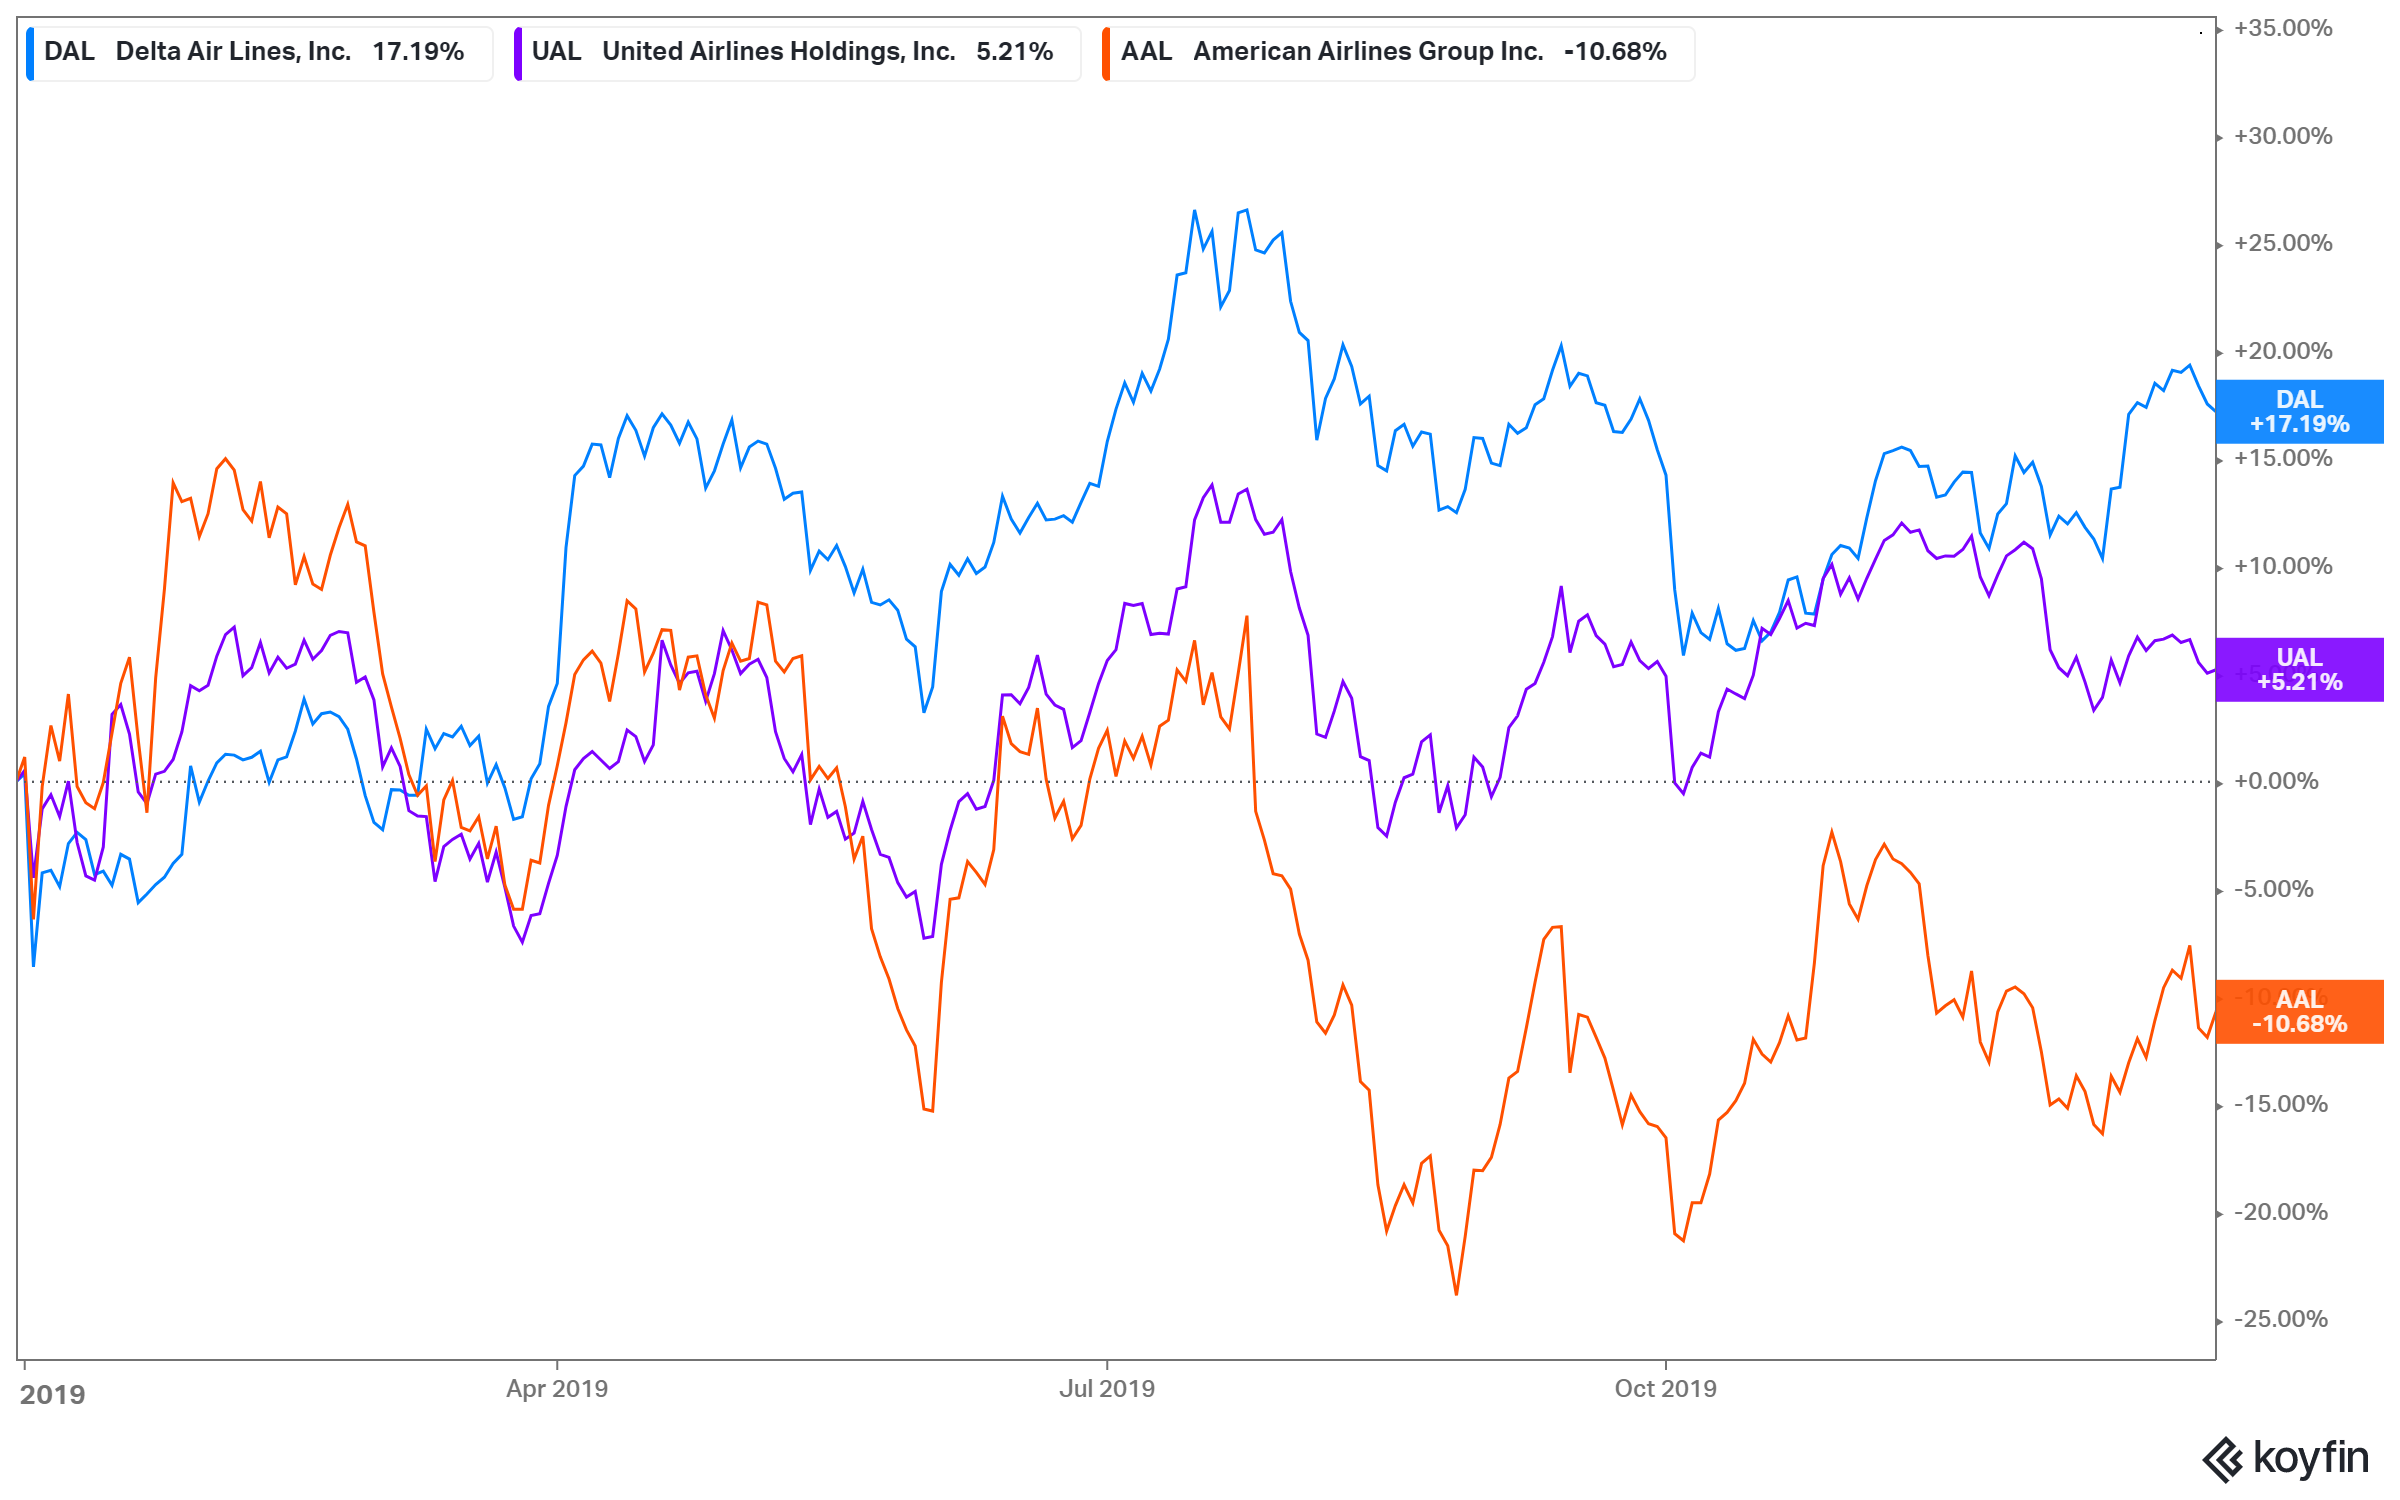 2019 stock price performance of the biggest three US airlines (Source: Koyfin)